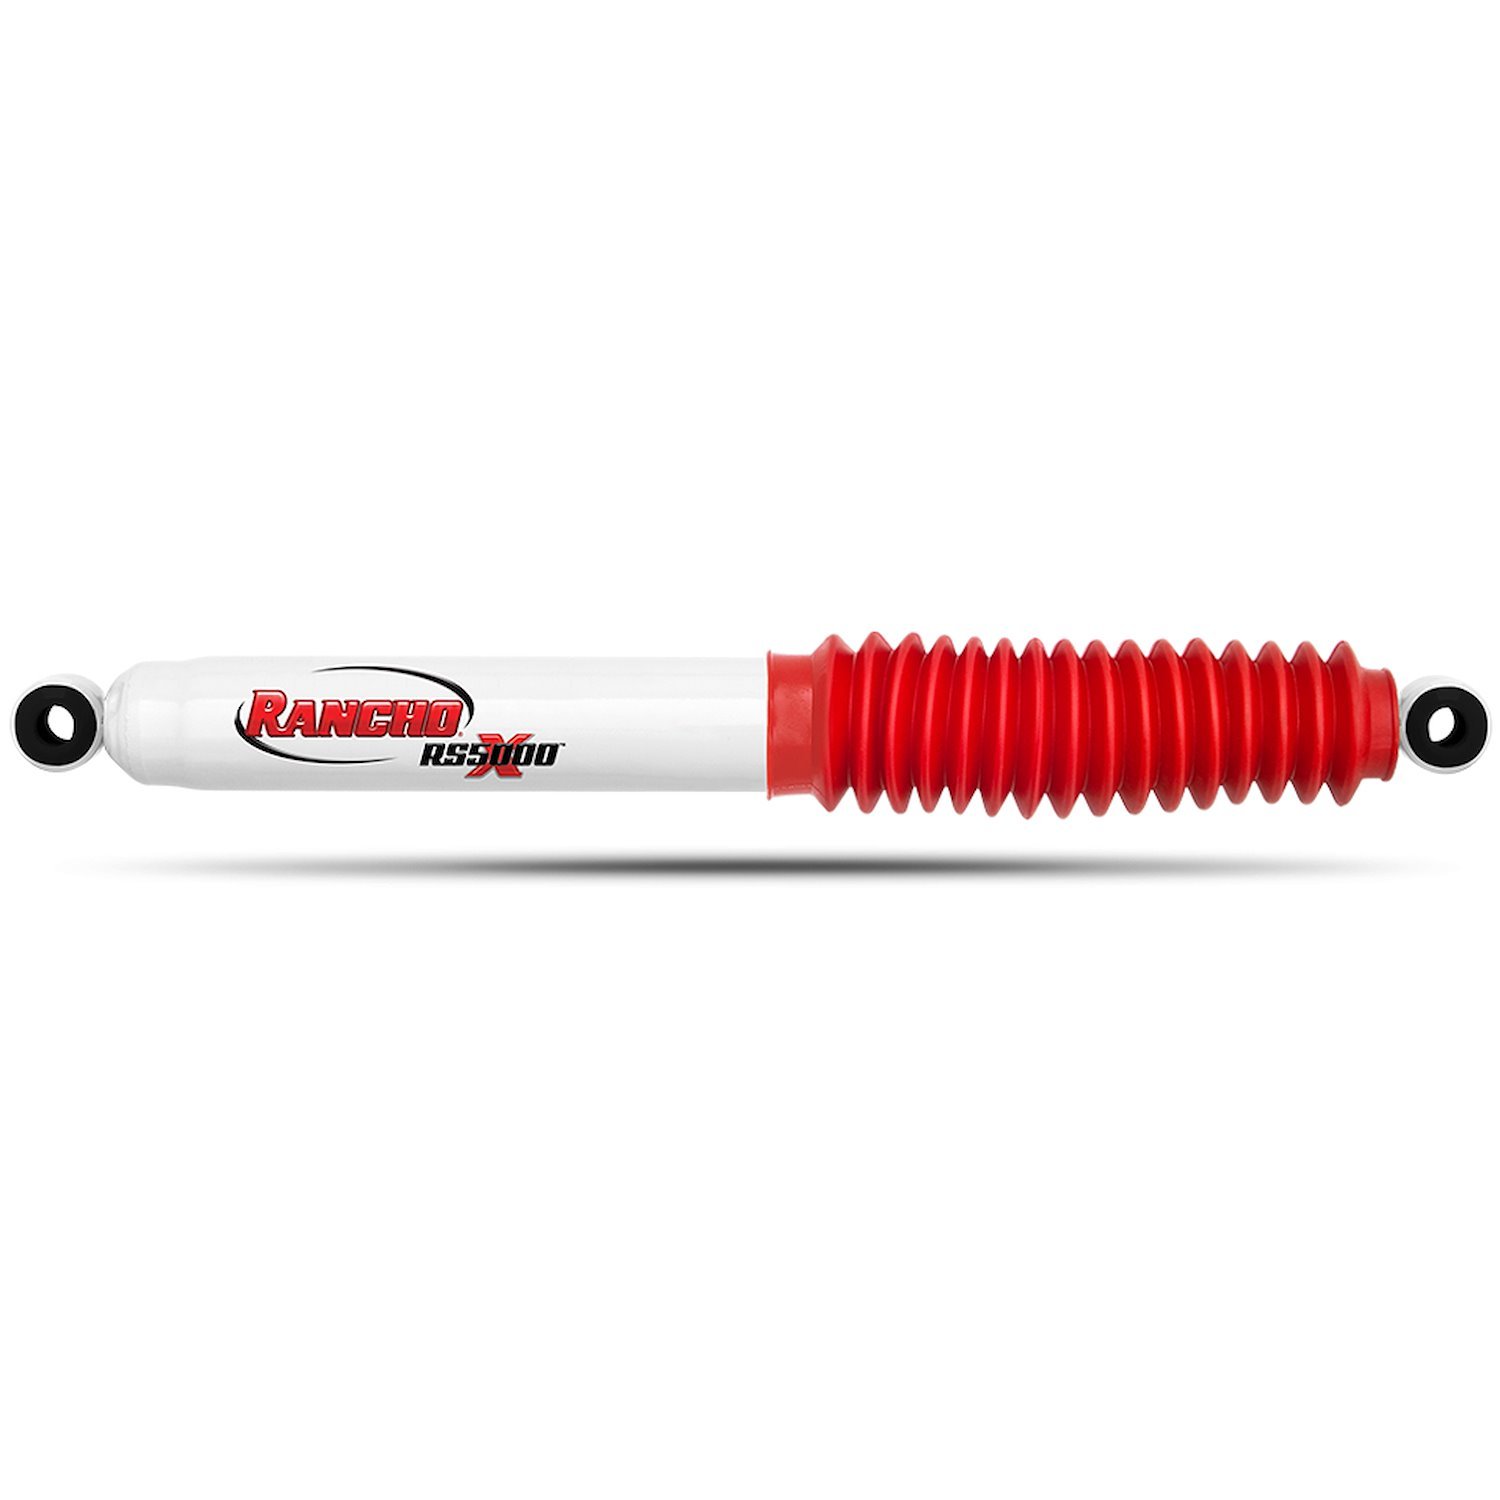 RS5000X Rear Shock Absorber for 1976-1993 Dodge W-Series Pickup and Ramcharger